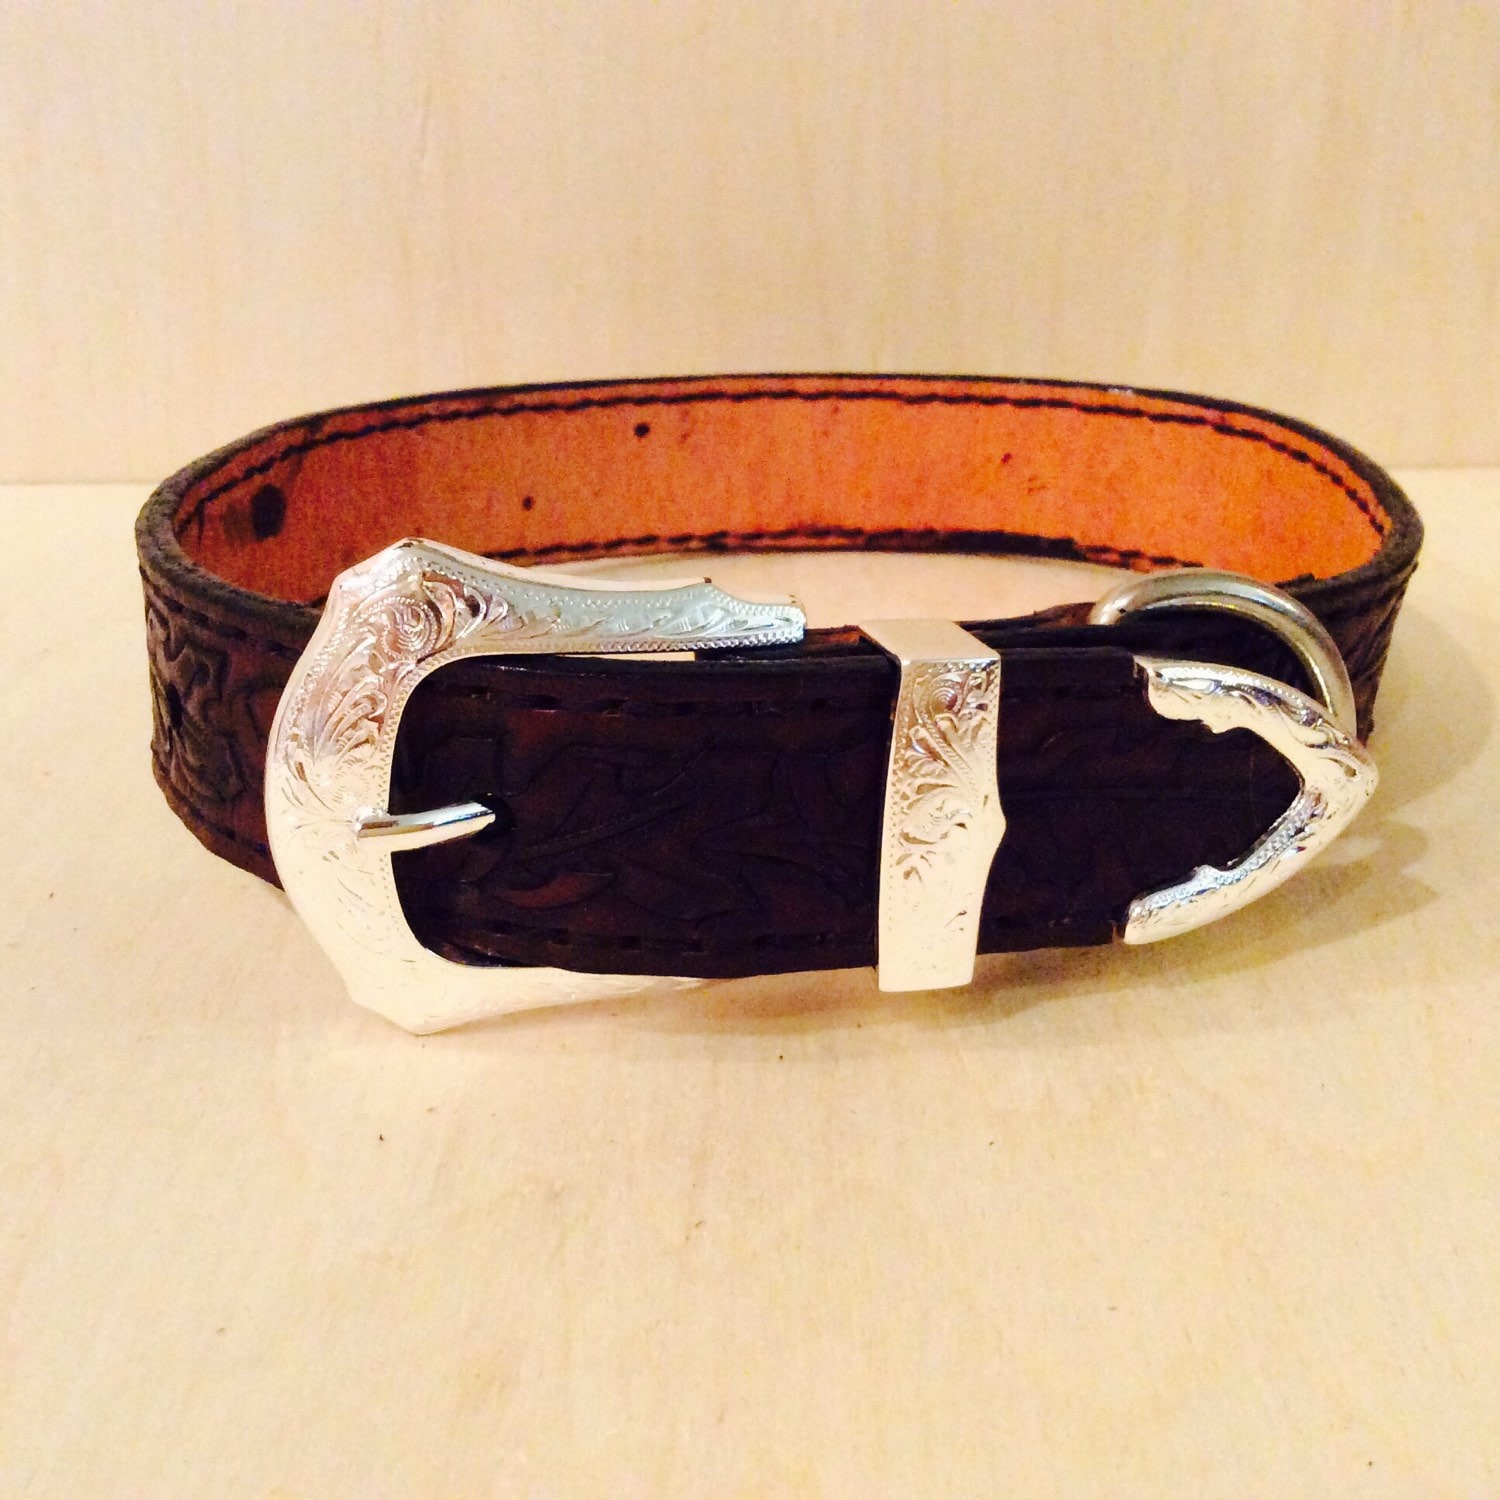 Handmade Tooled Leather Dog Collar with Western by LeafLeatherwork